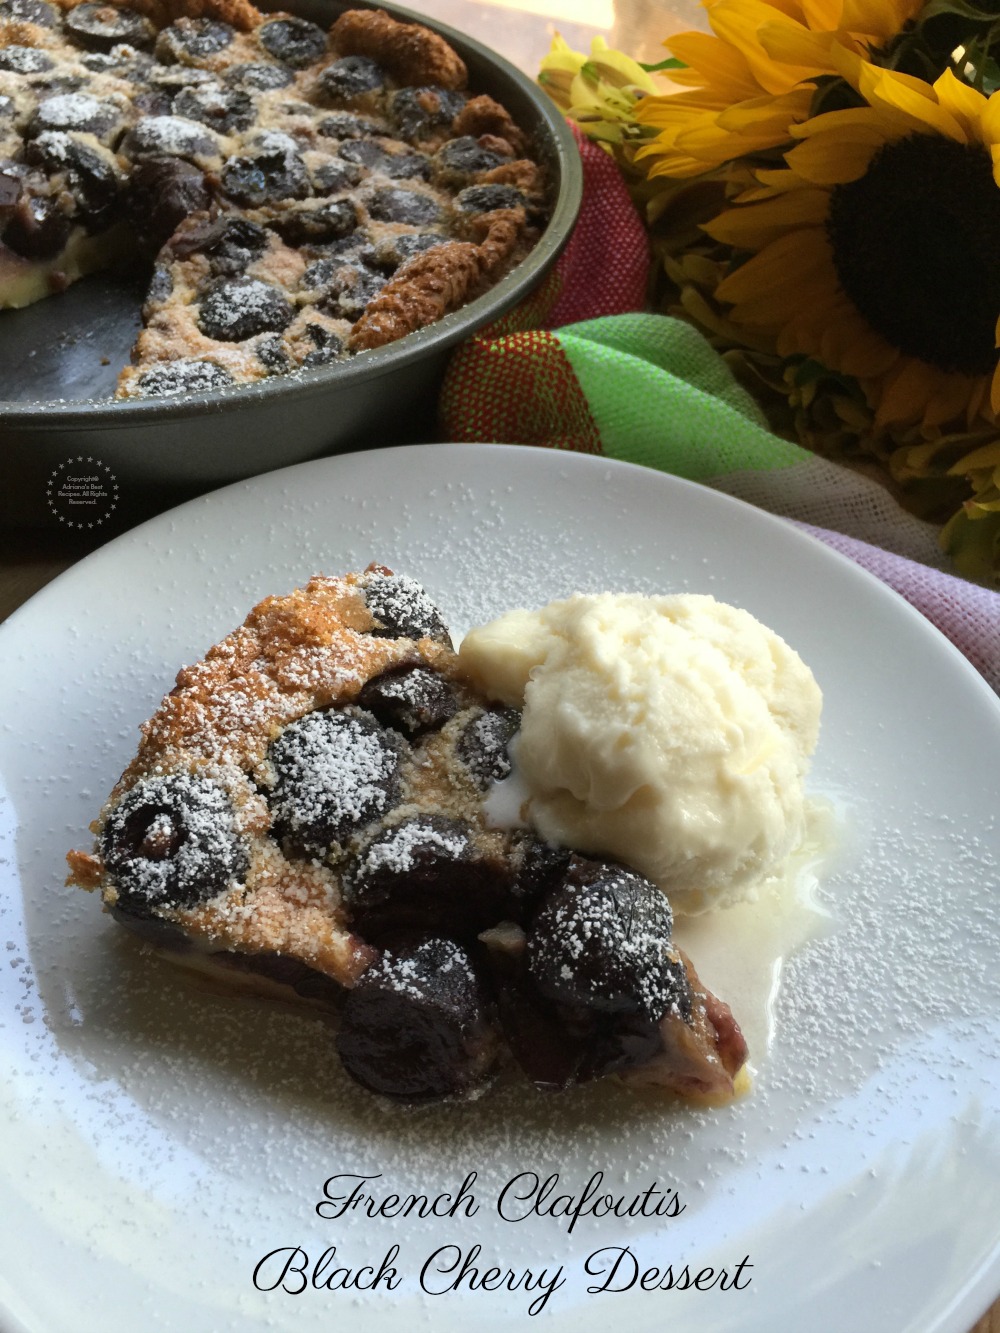 The French Clafoutis Black Cherry dessert is a traditional recipe that was born in the Limousin region of France where there is a bounty of black cherries